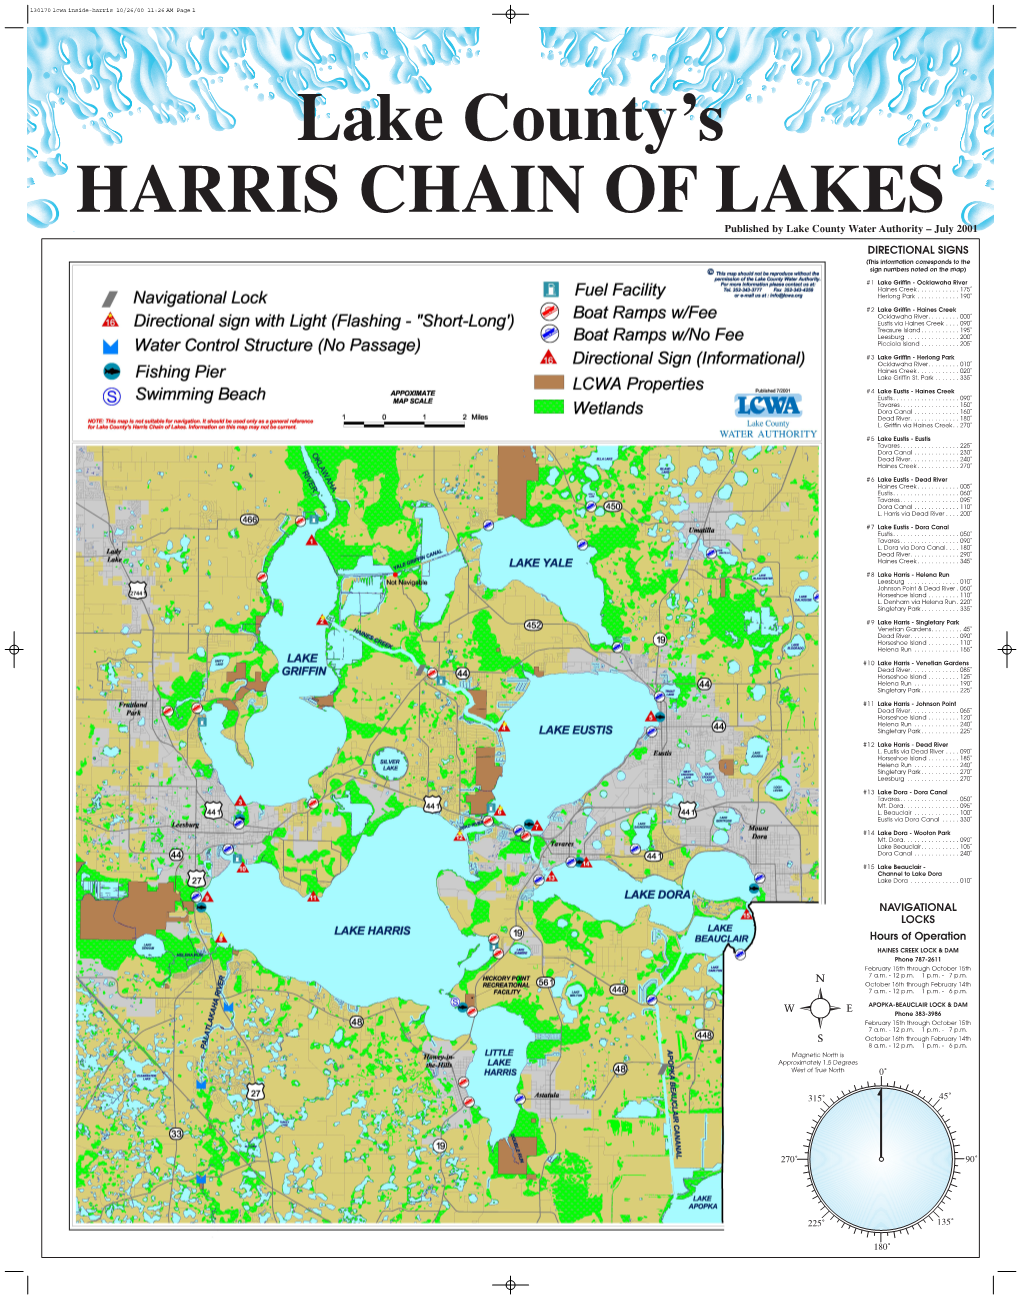 HARRIS CHAIN of LAKES Published by Lake County Water Authority – July 2001 DIRECTIONAL SIGNS (This Information Corresponds to the Sign Numbers Noted on the Map)